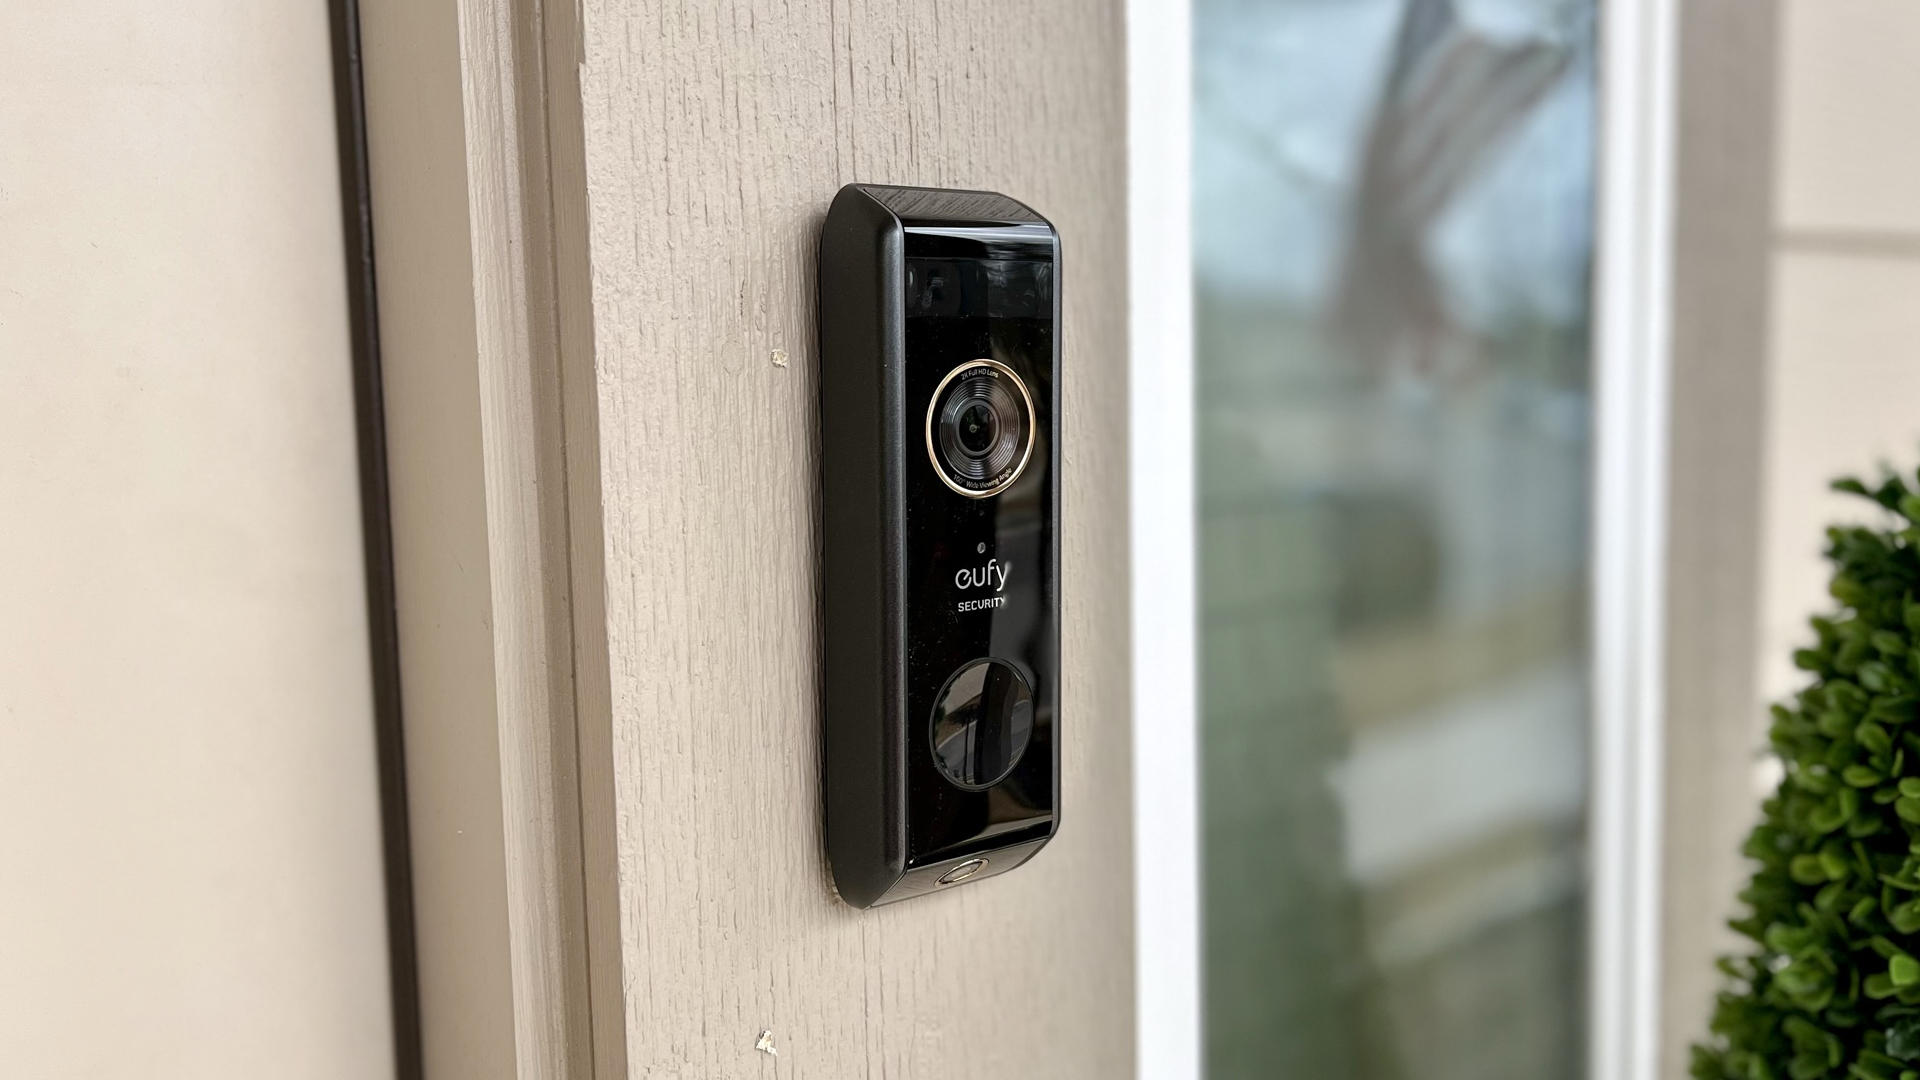 The Eufy Video Doorbell Dual mounted on a doorframe